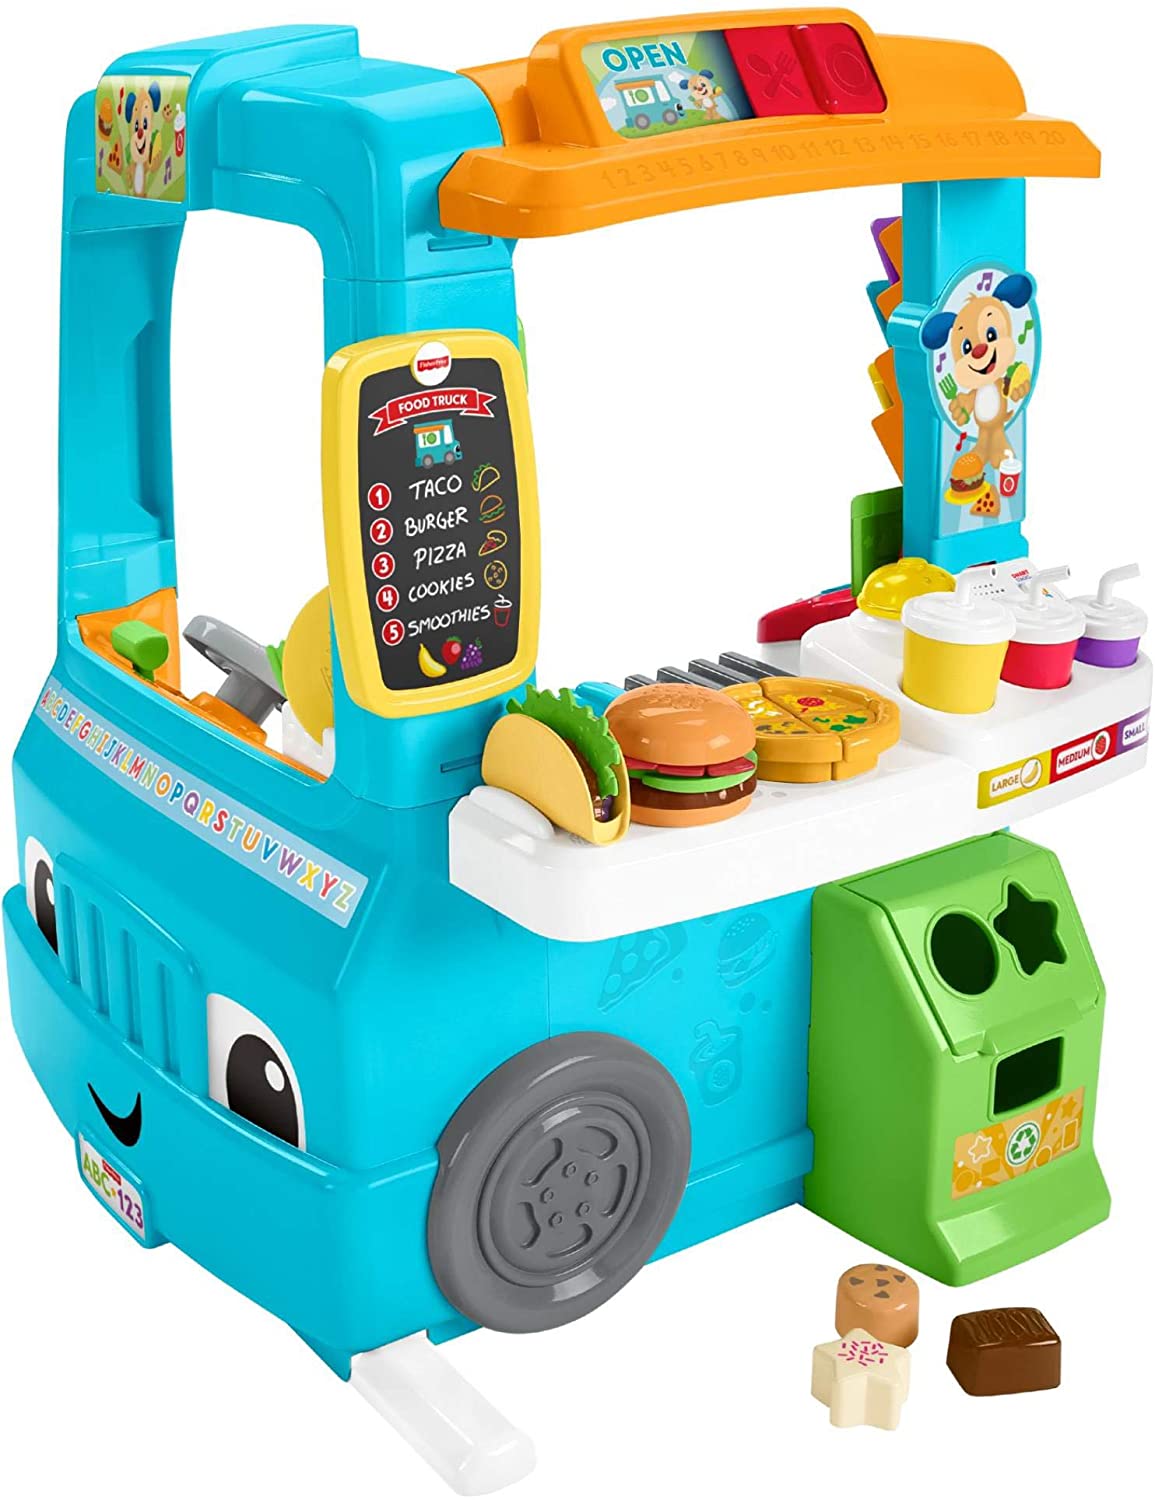 7 Best Fisher-Price Laugh & Learn Reviews of 2022 1